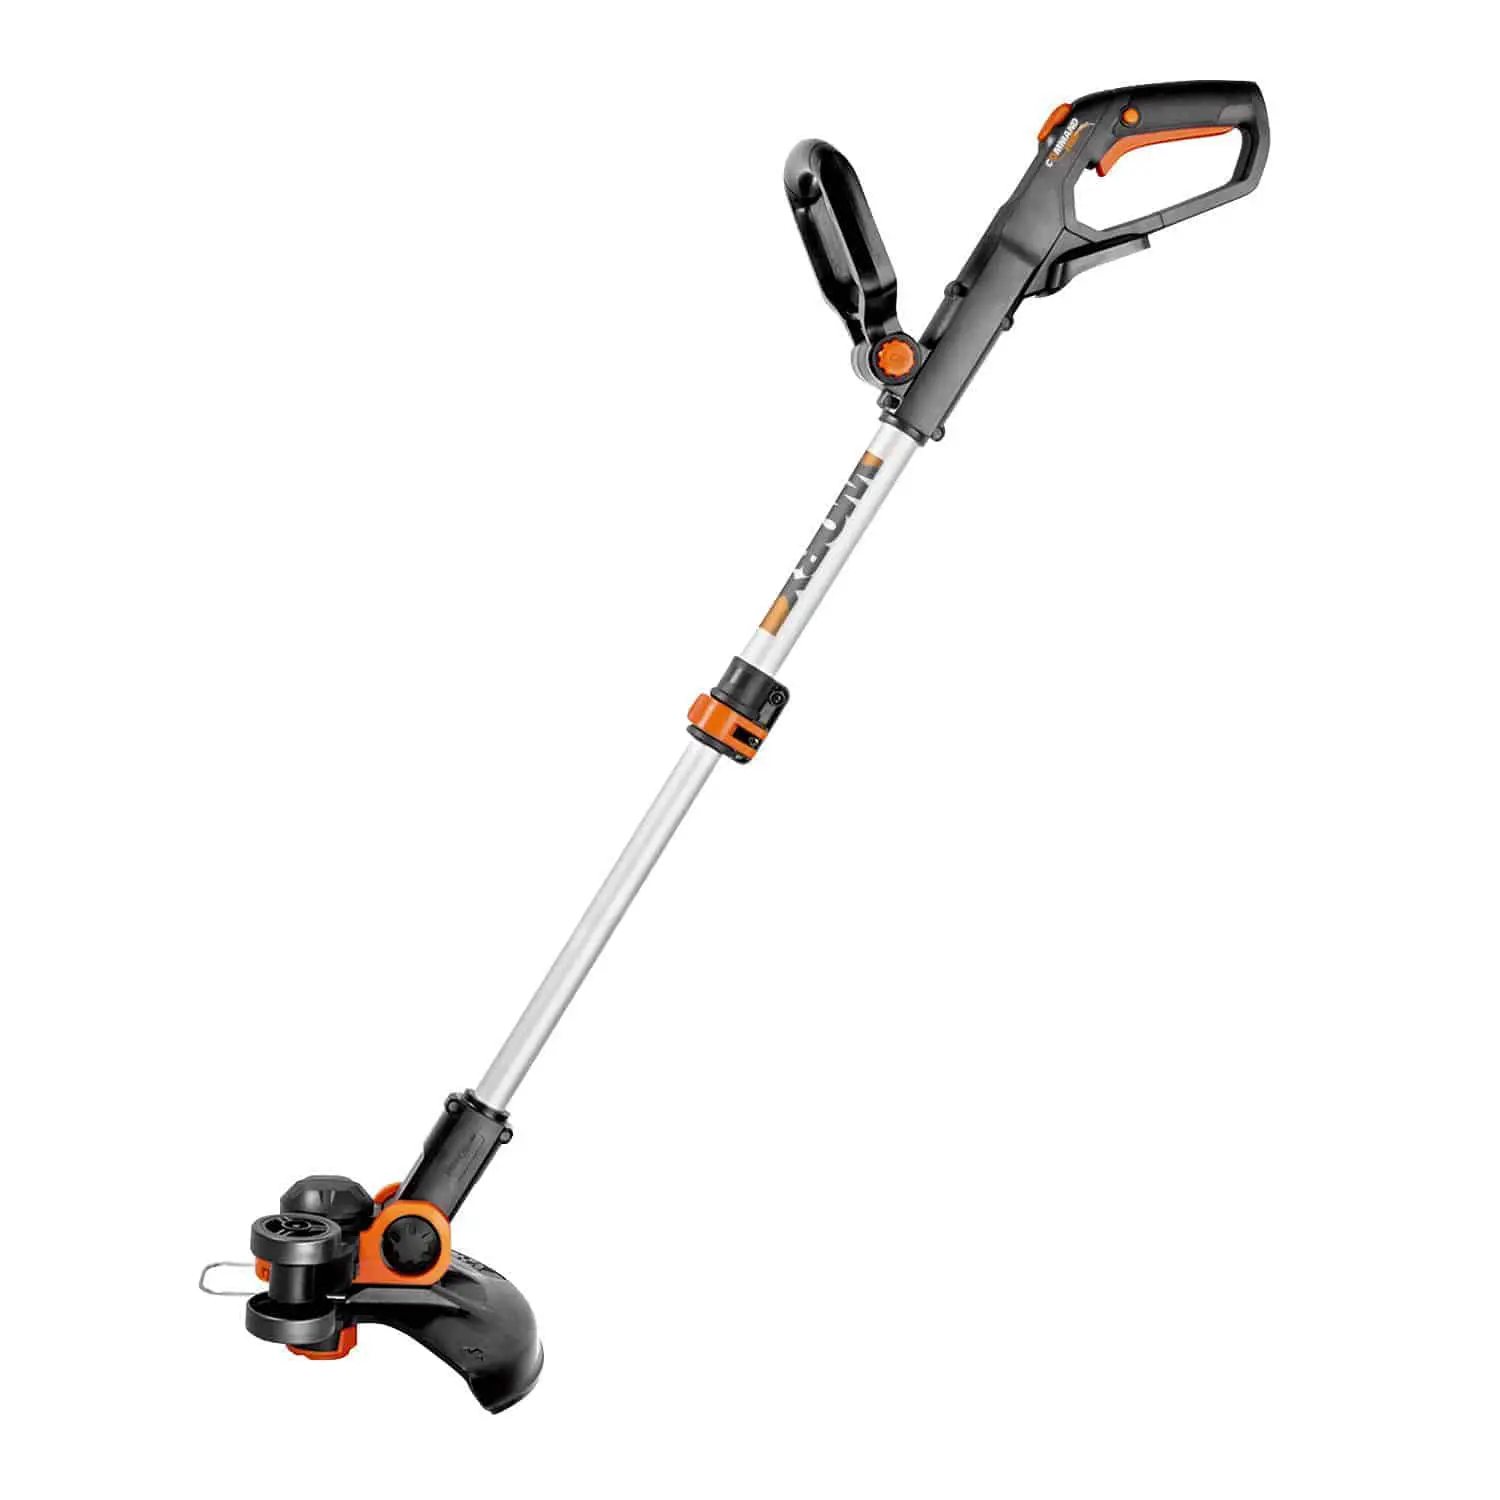 10 Best Cordless Battery Powered Weed Eater of 2022 1001 Gardens